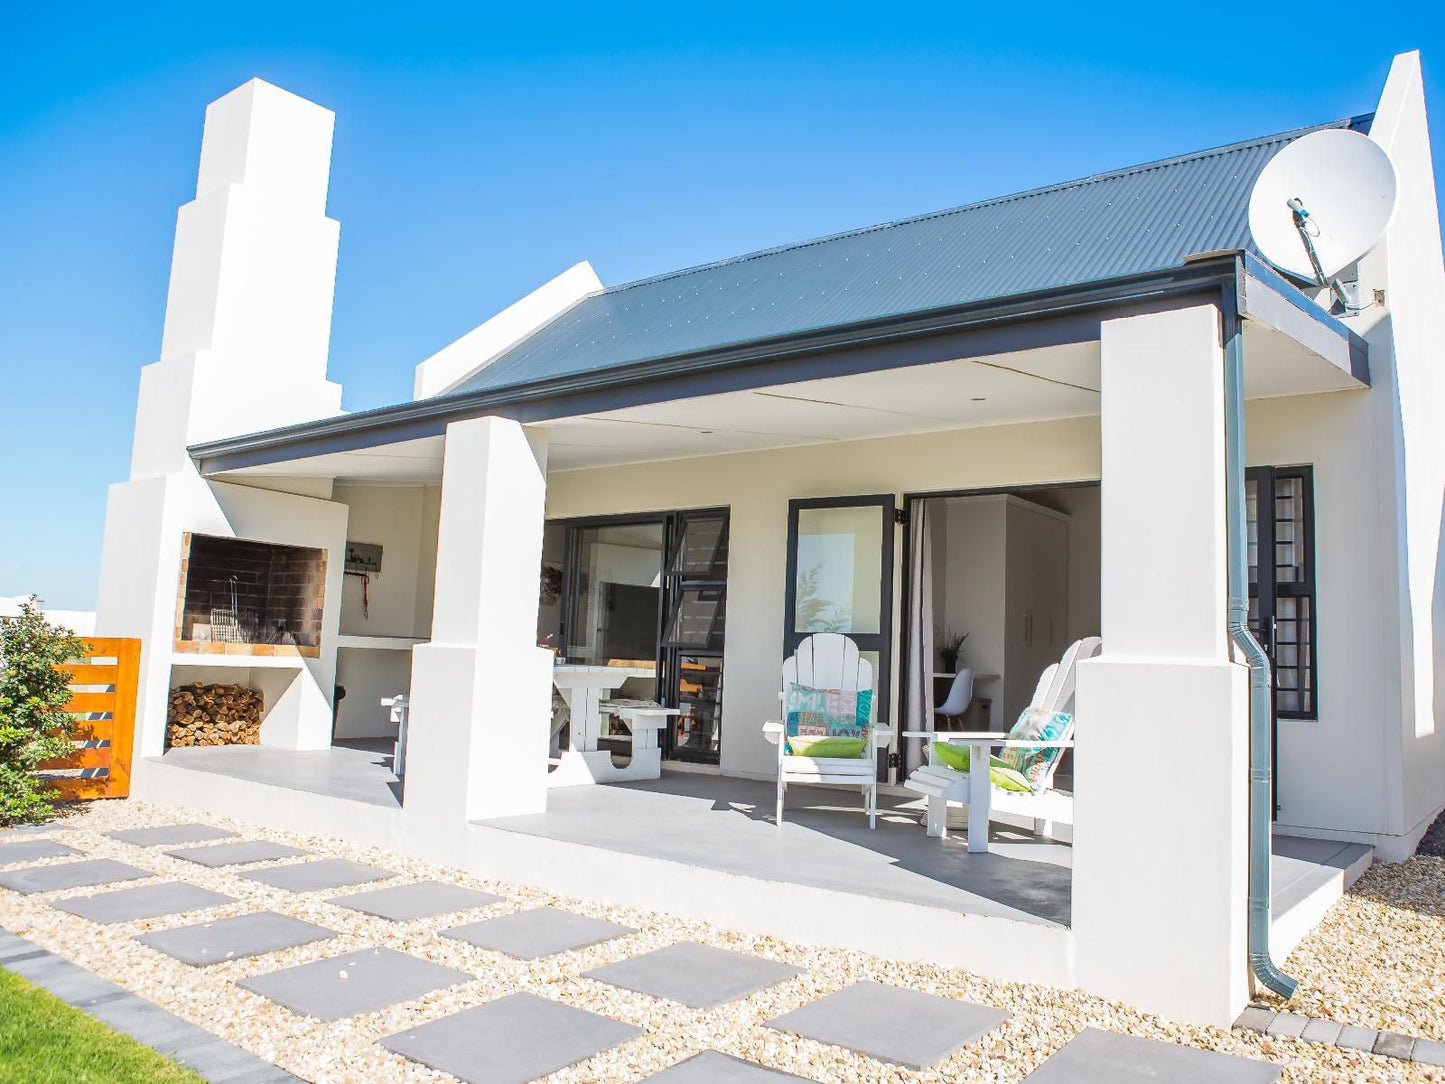 Three Feathers Cottages Olifantskop Langebaan Western Cape South Africa House, Building, Architecture